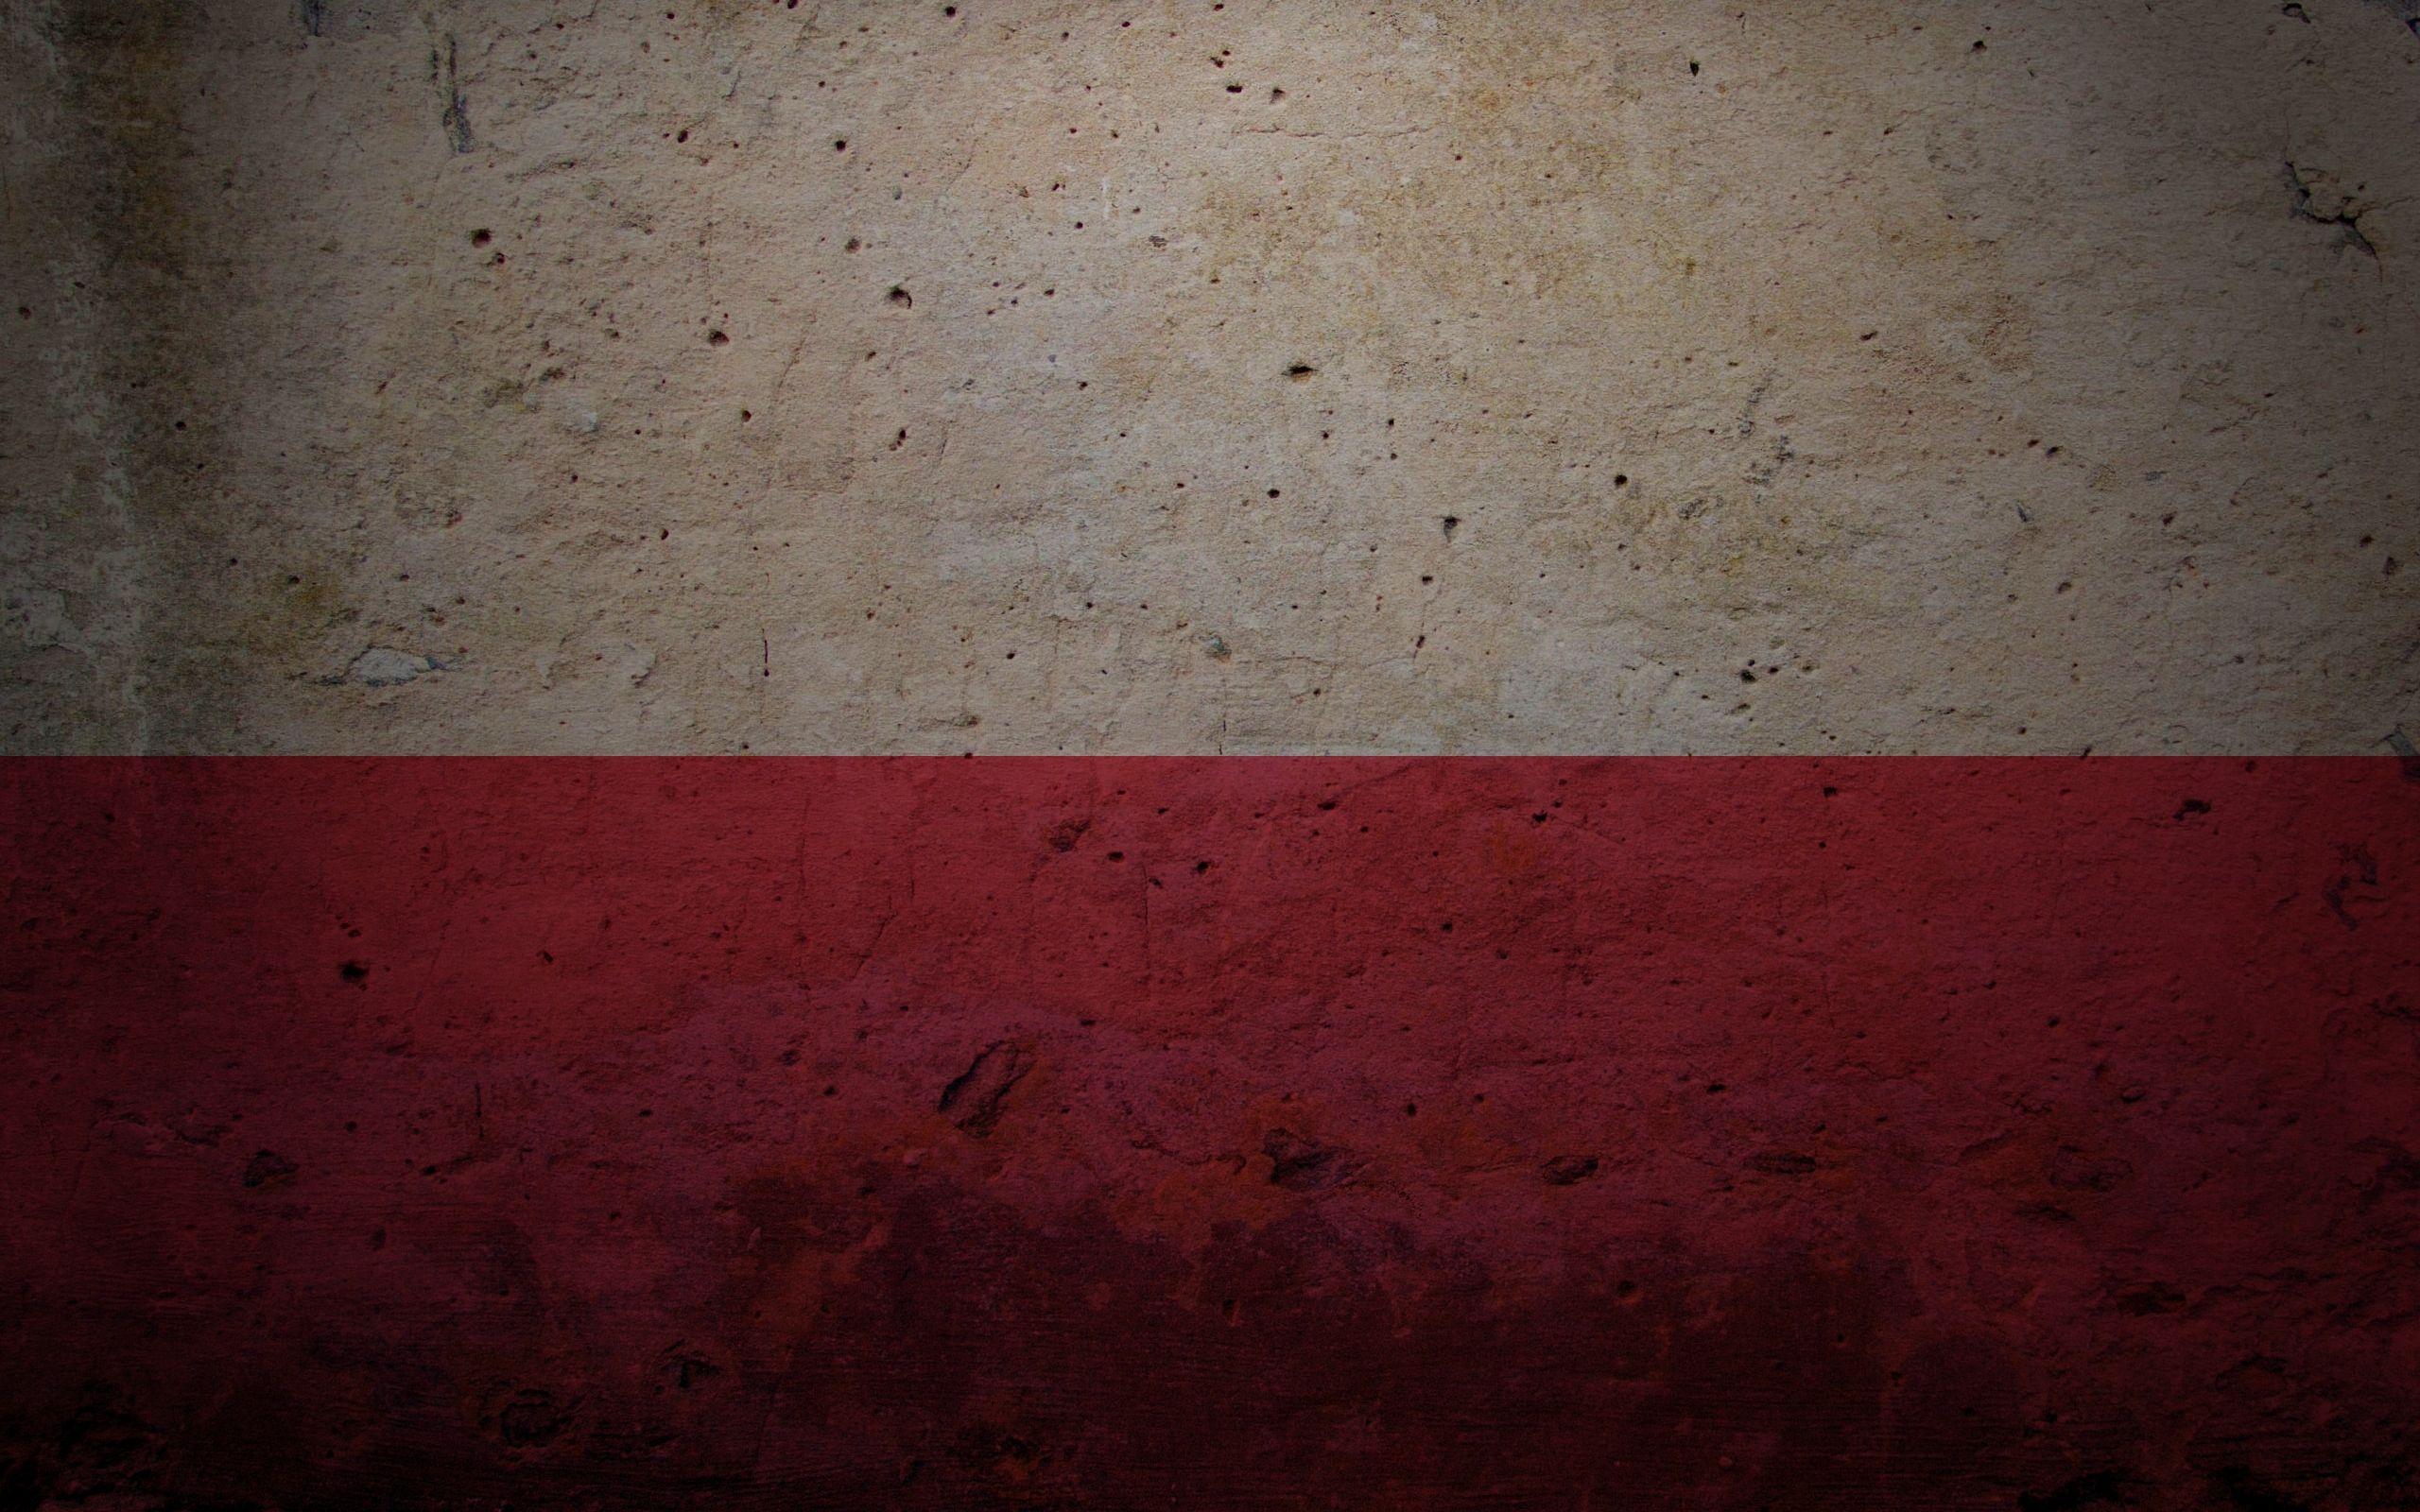 Poland Flag Wallpapers